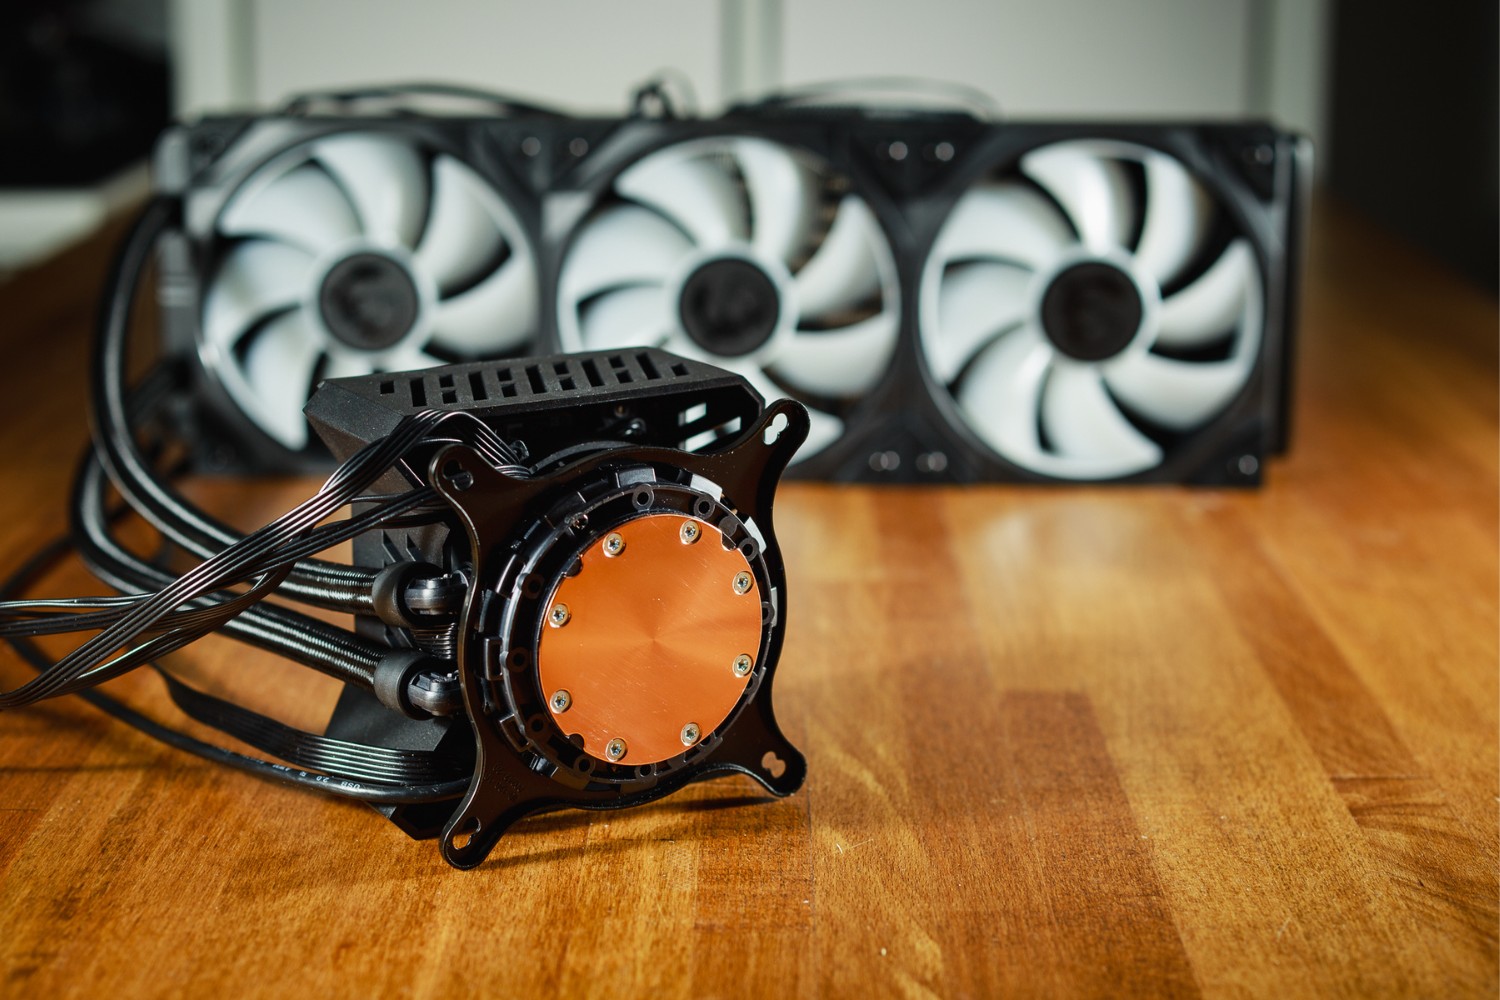 Modifying The Cooling System Of Asetek 510LC 120mm Liquid CPU Cooler